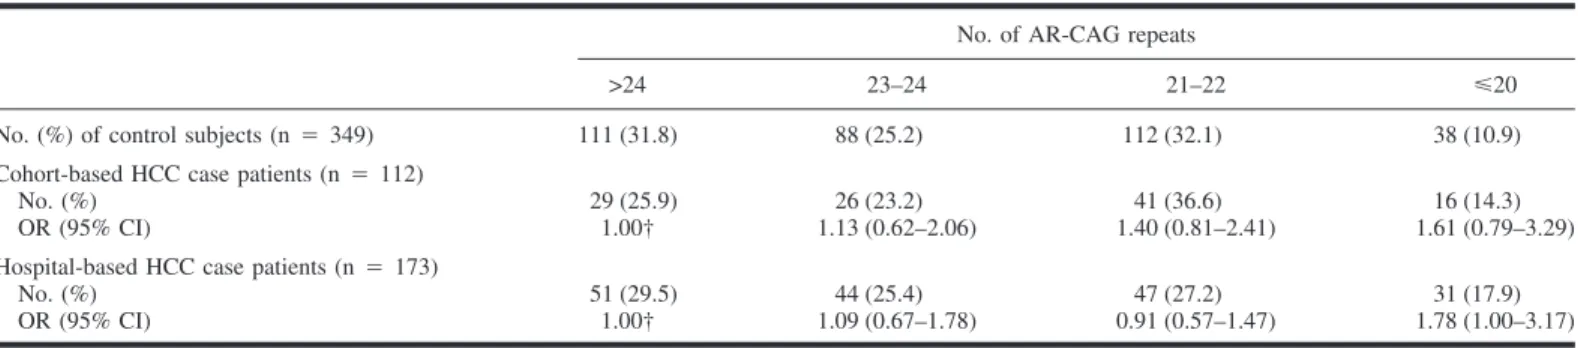 Table 2. Frequency distribution of the number of CAG repeats in the androgen receptor (AR) gene among early- and late-onset hepatitis B surface antigen (HBsAg)-positive case patients with hepatocellular carcinoma (HCC) compared with HBsAg-positive control 